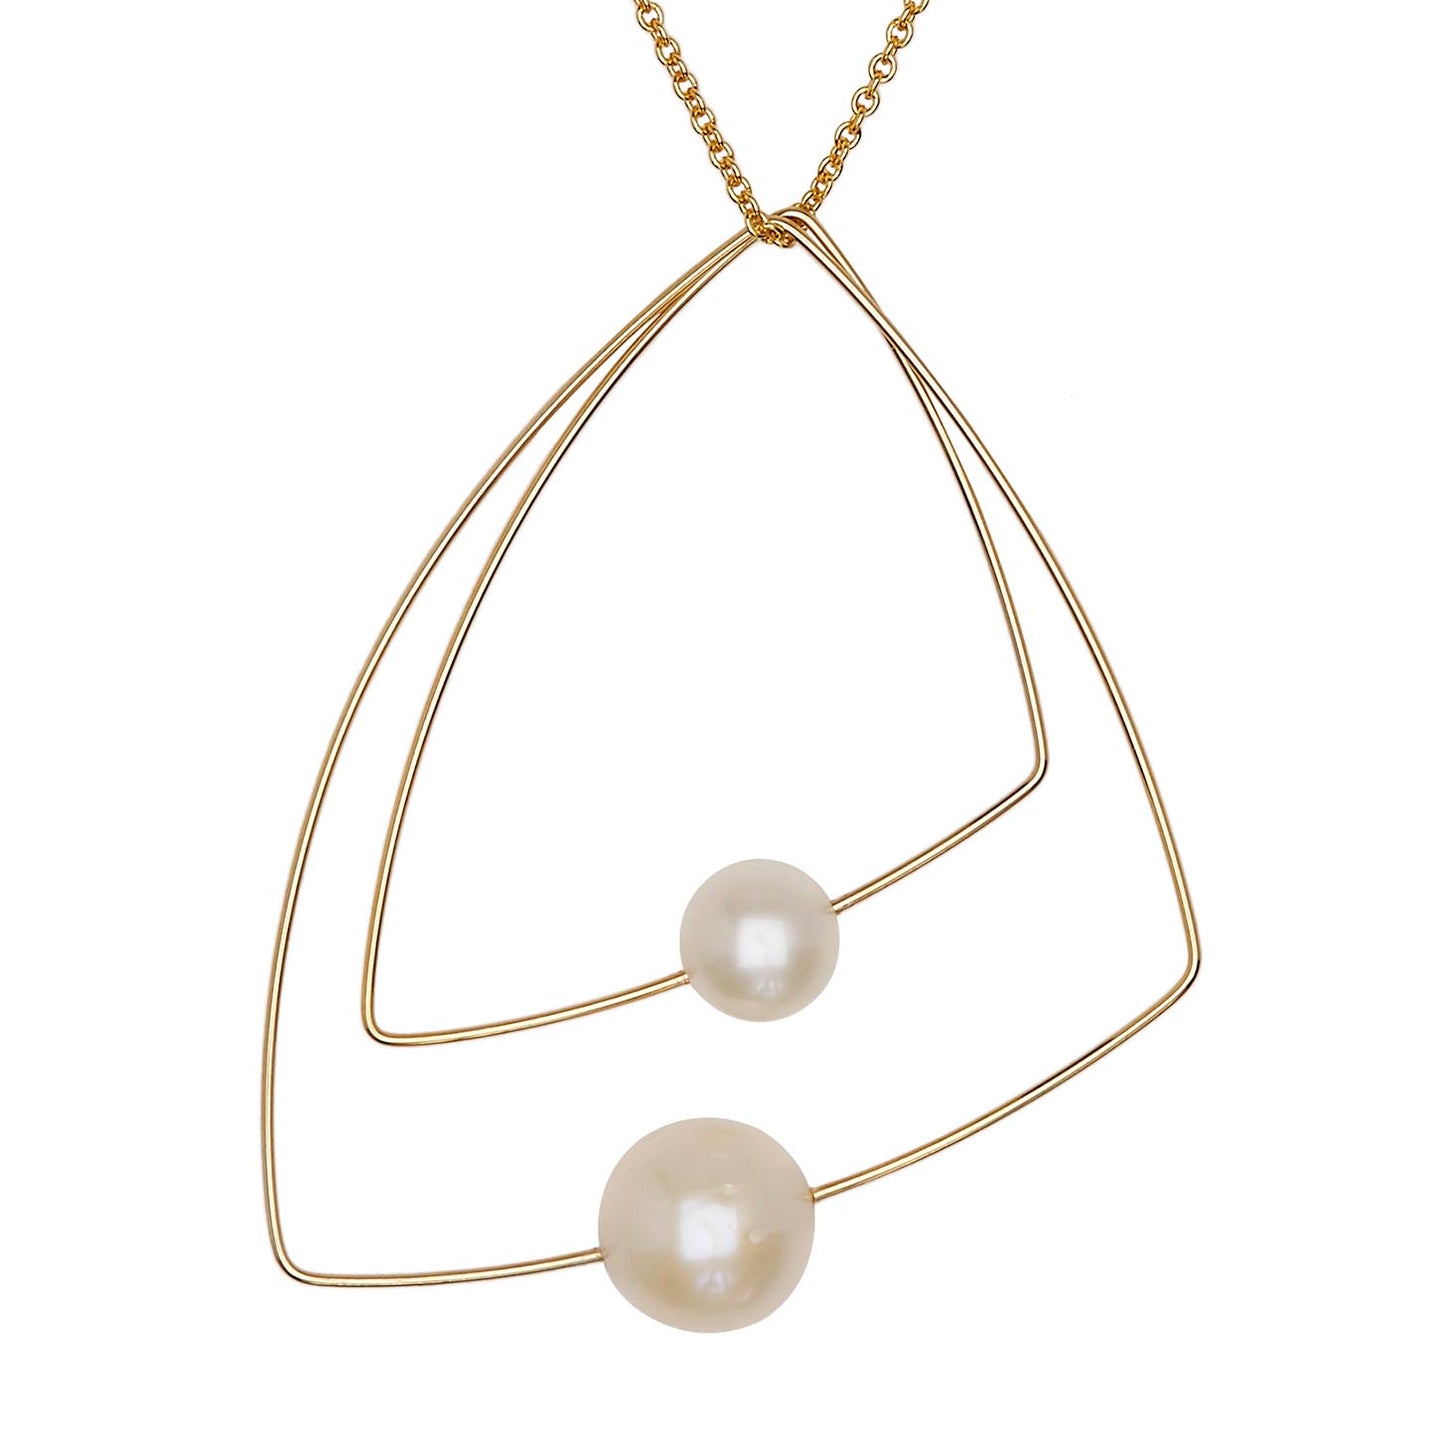 Double Triangle Pendant Necklace with White Pearls